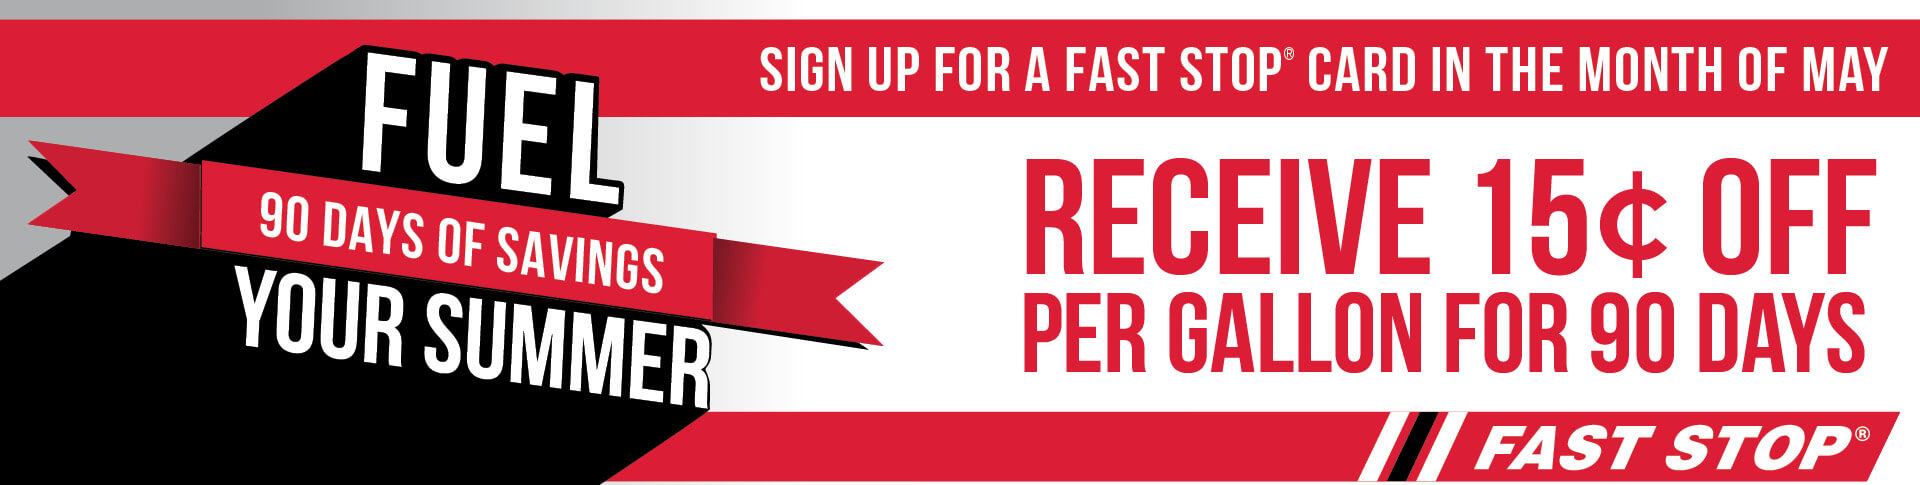 FAST-STOP-Card-Sign-Up-May